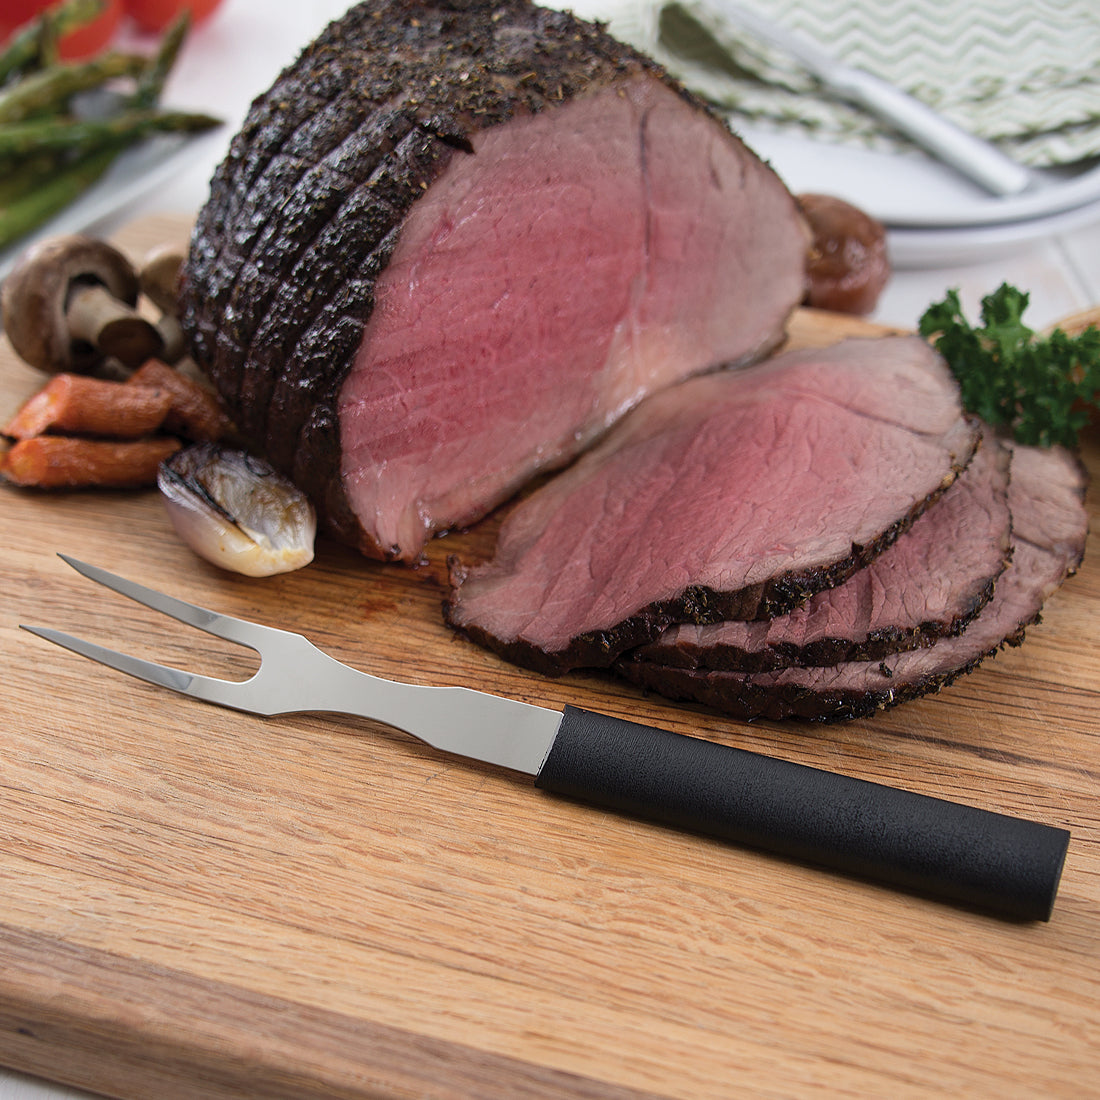 Chef Slicing Roast Beef Using Carving Knife And Fork Stock Photo